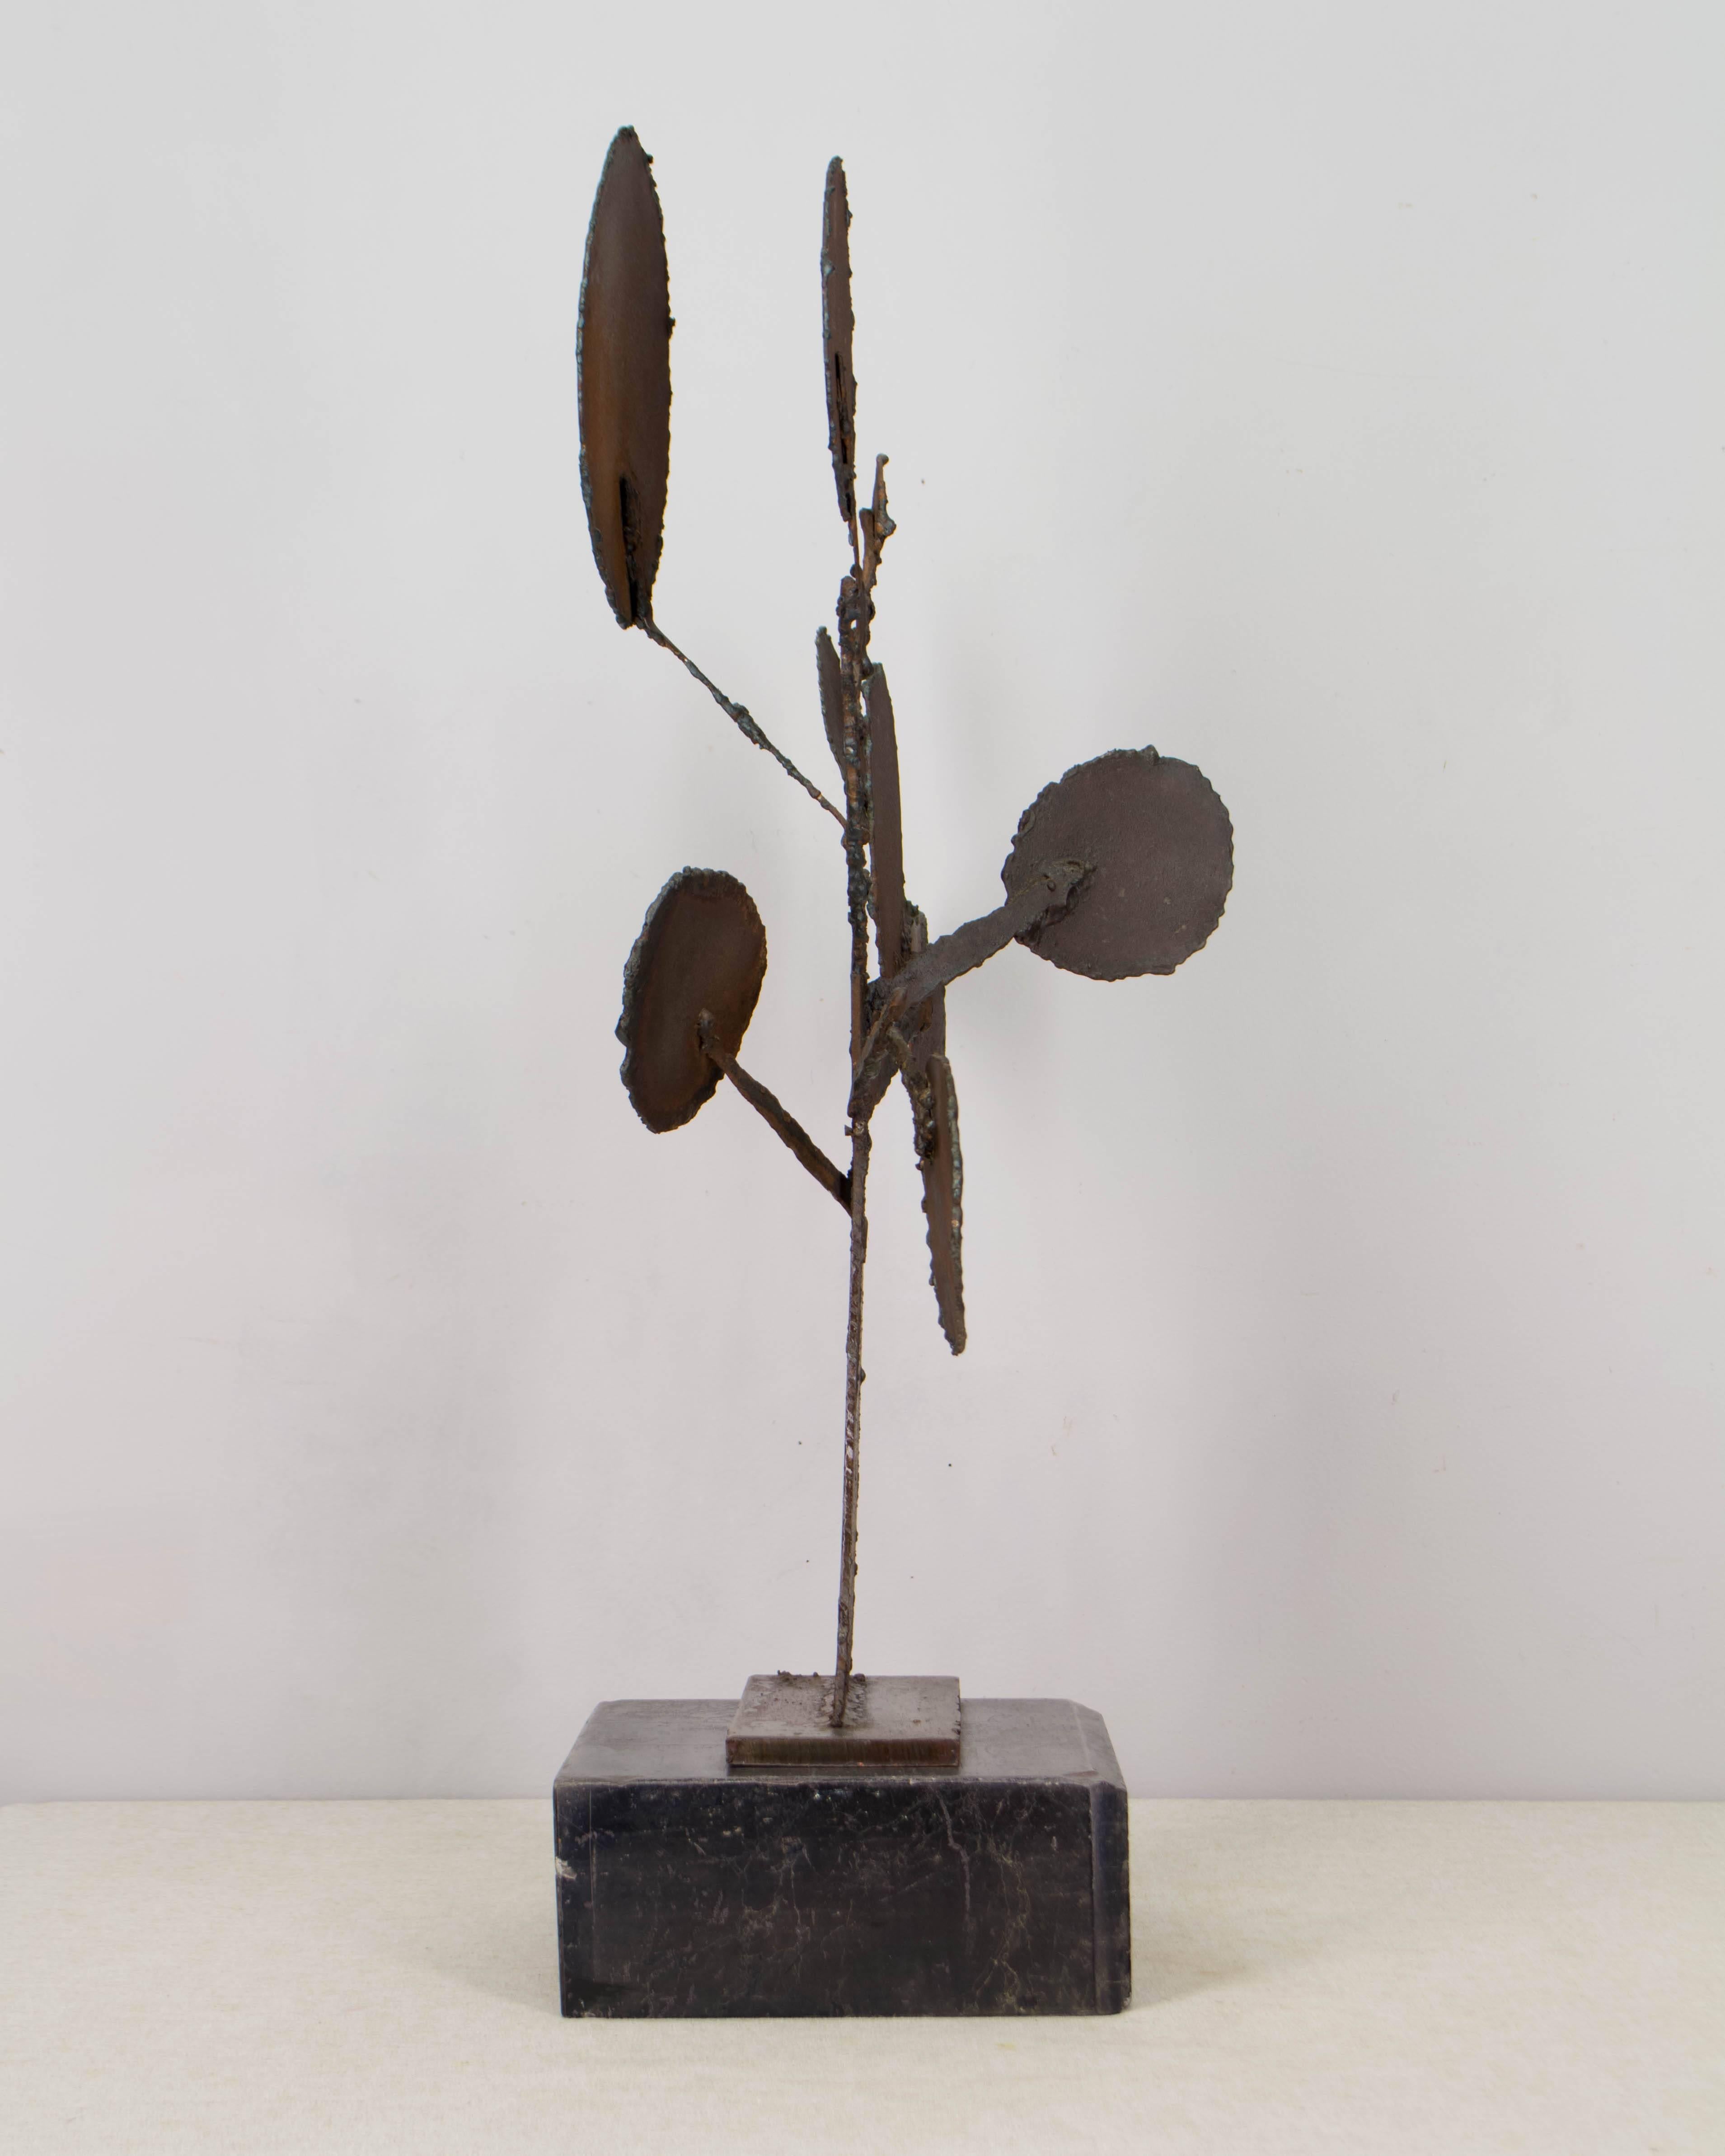 Mid-Century Modern Brutalist tree sculpture. Torch-cut and welded steel with rusty, bronze colored patina. Bolted to a slate base.
More photos available upon request. We have a large selection of French antiques. Please visit our showroom in Winter